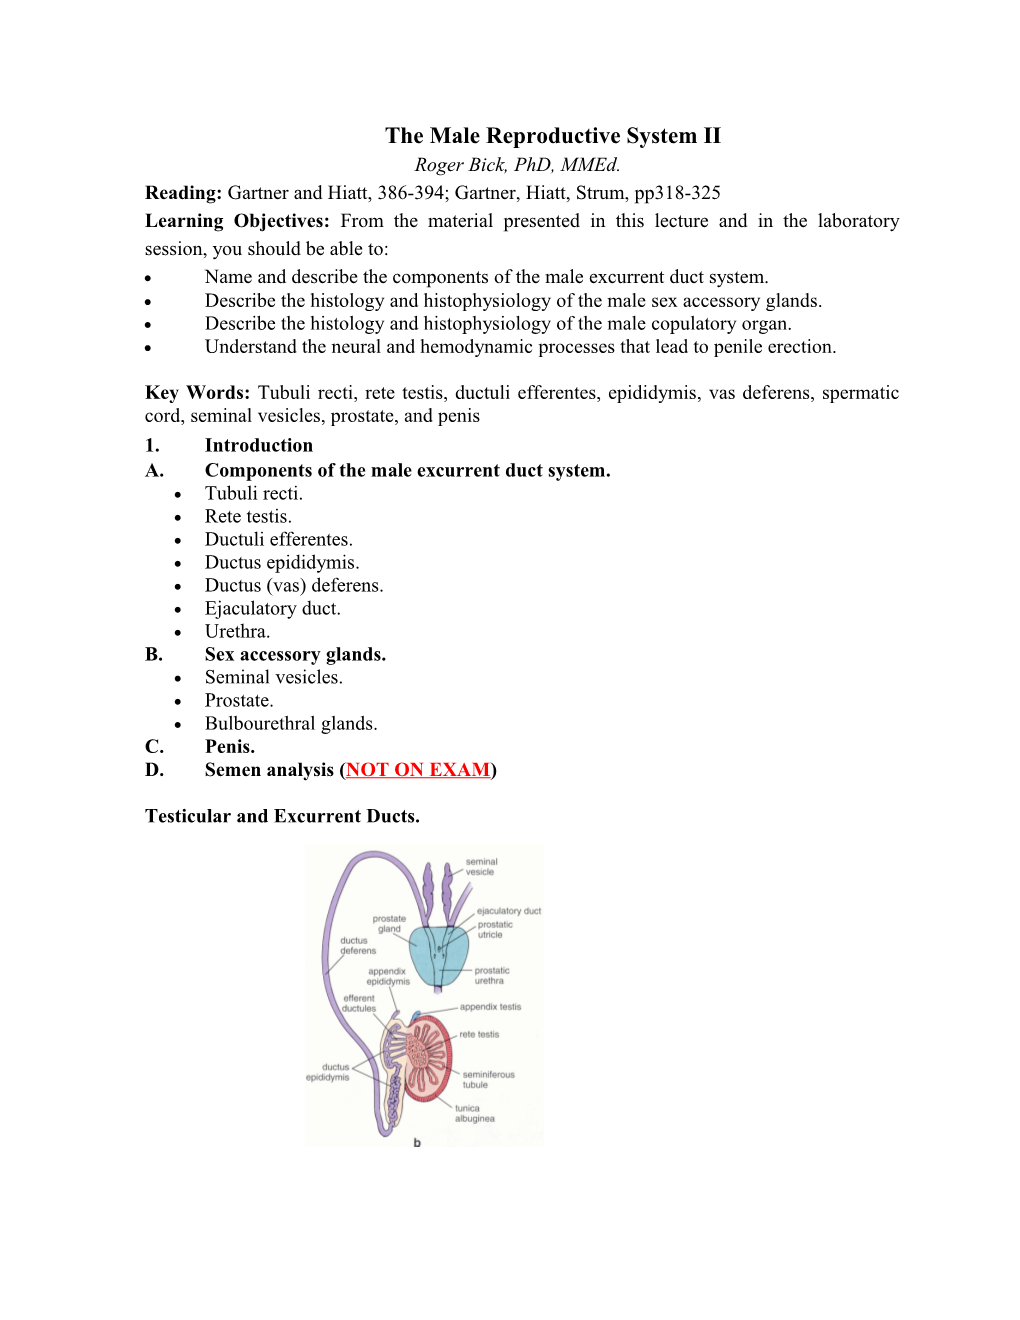 The Male Reproductive System II